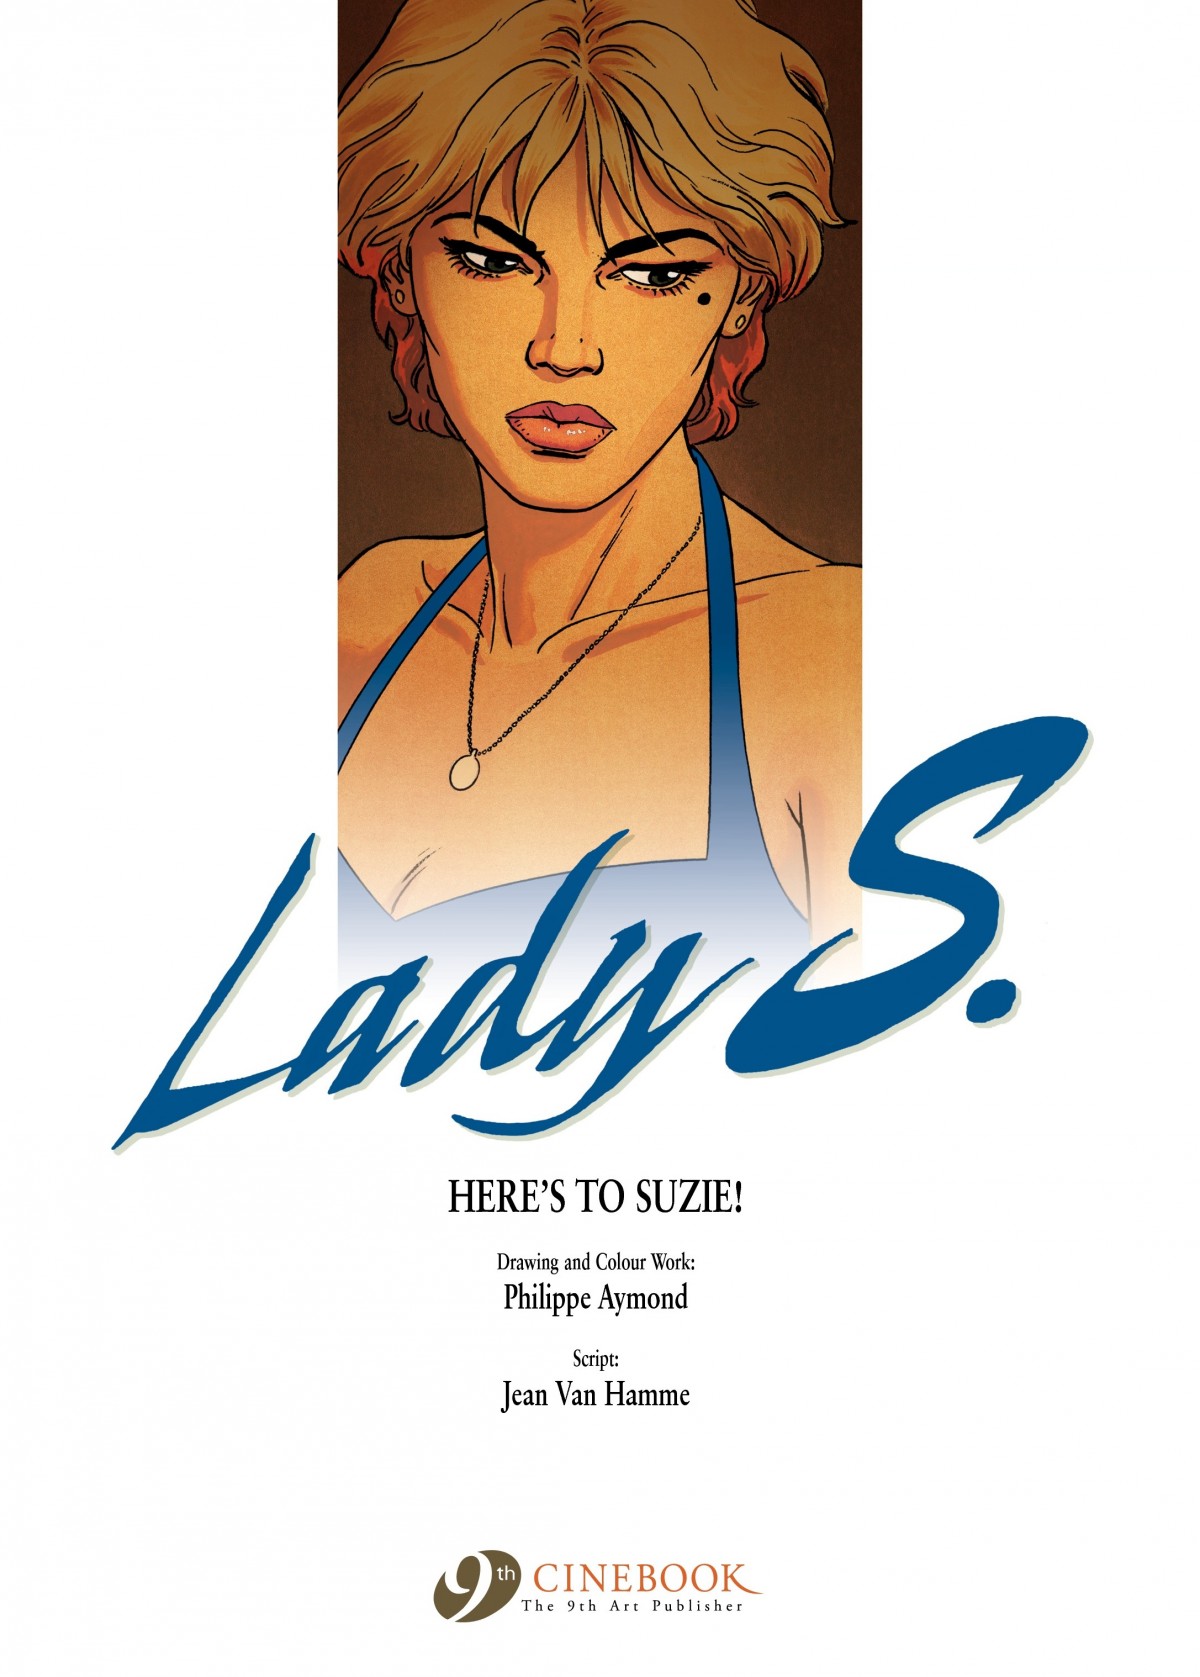 Read online Lady S. comic -  Issue # TPB 1 - 2